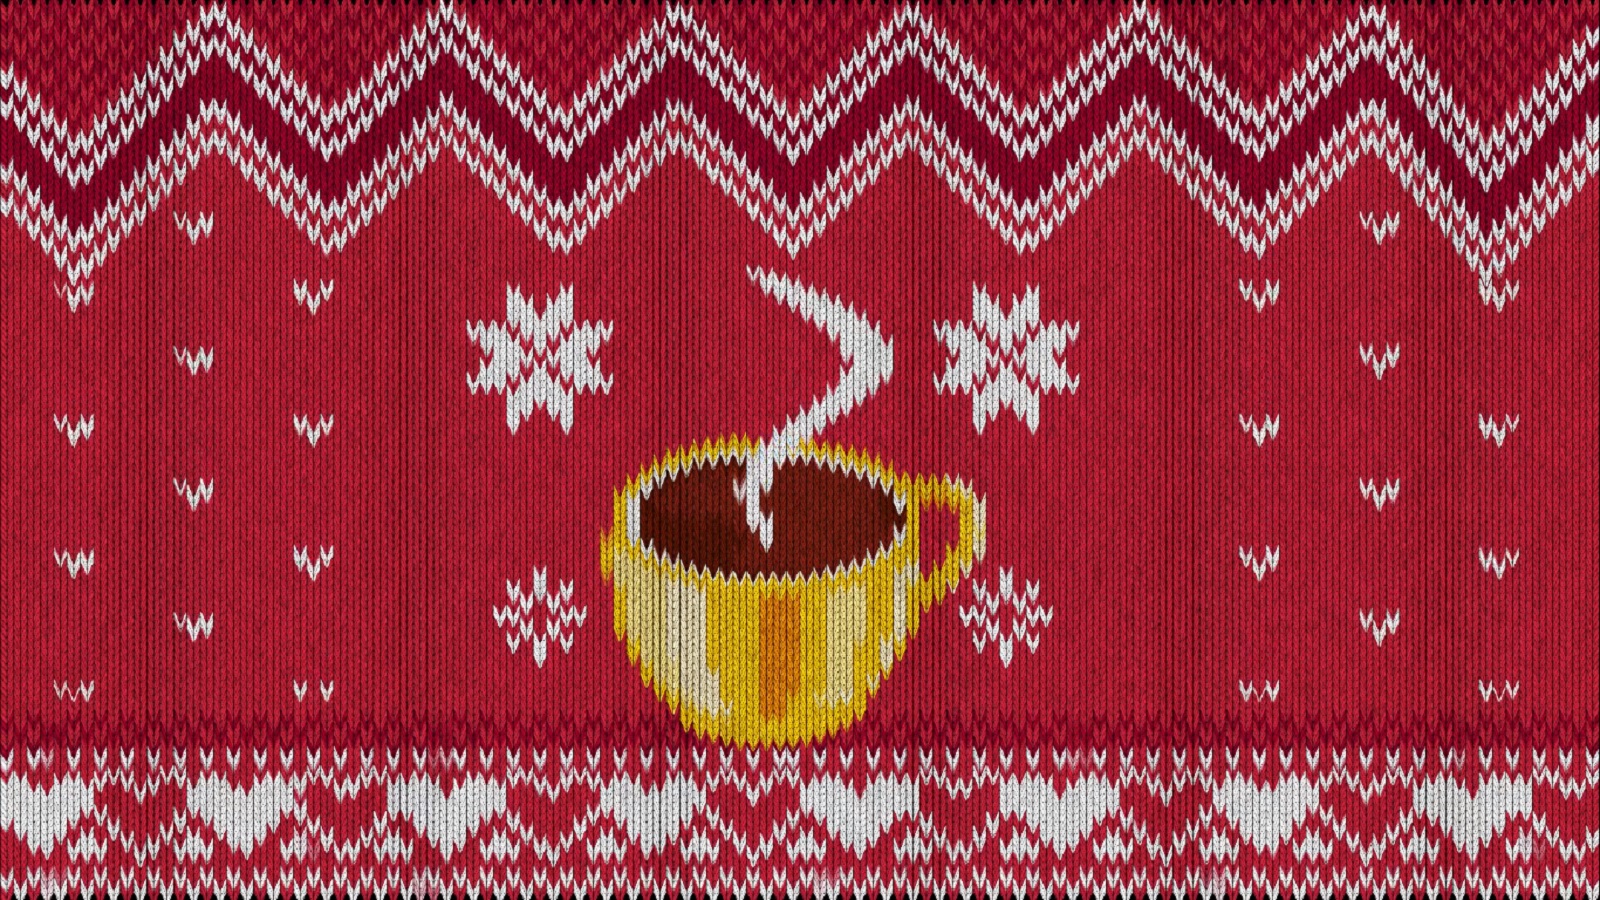 For This Year’s Xmas, a Coffee Brand Wears a Knitted Packaging